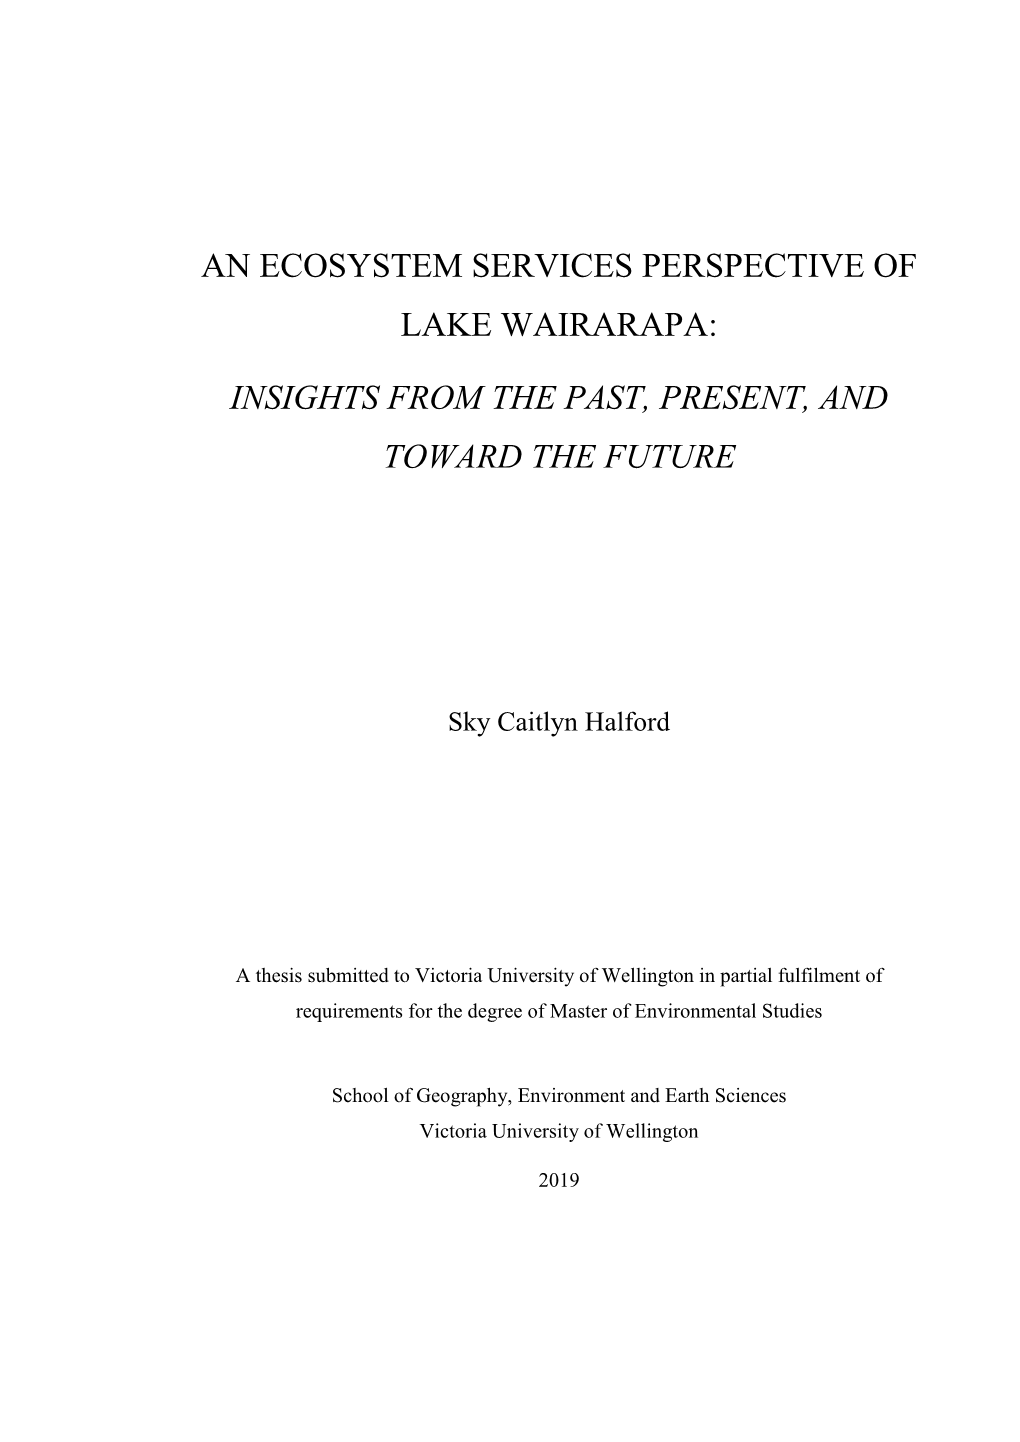 An Ecosystem Services Perspective of Lake Wairarapa